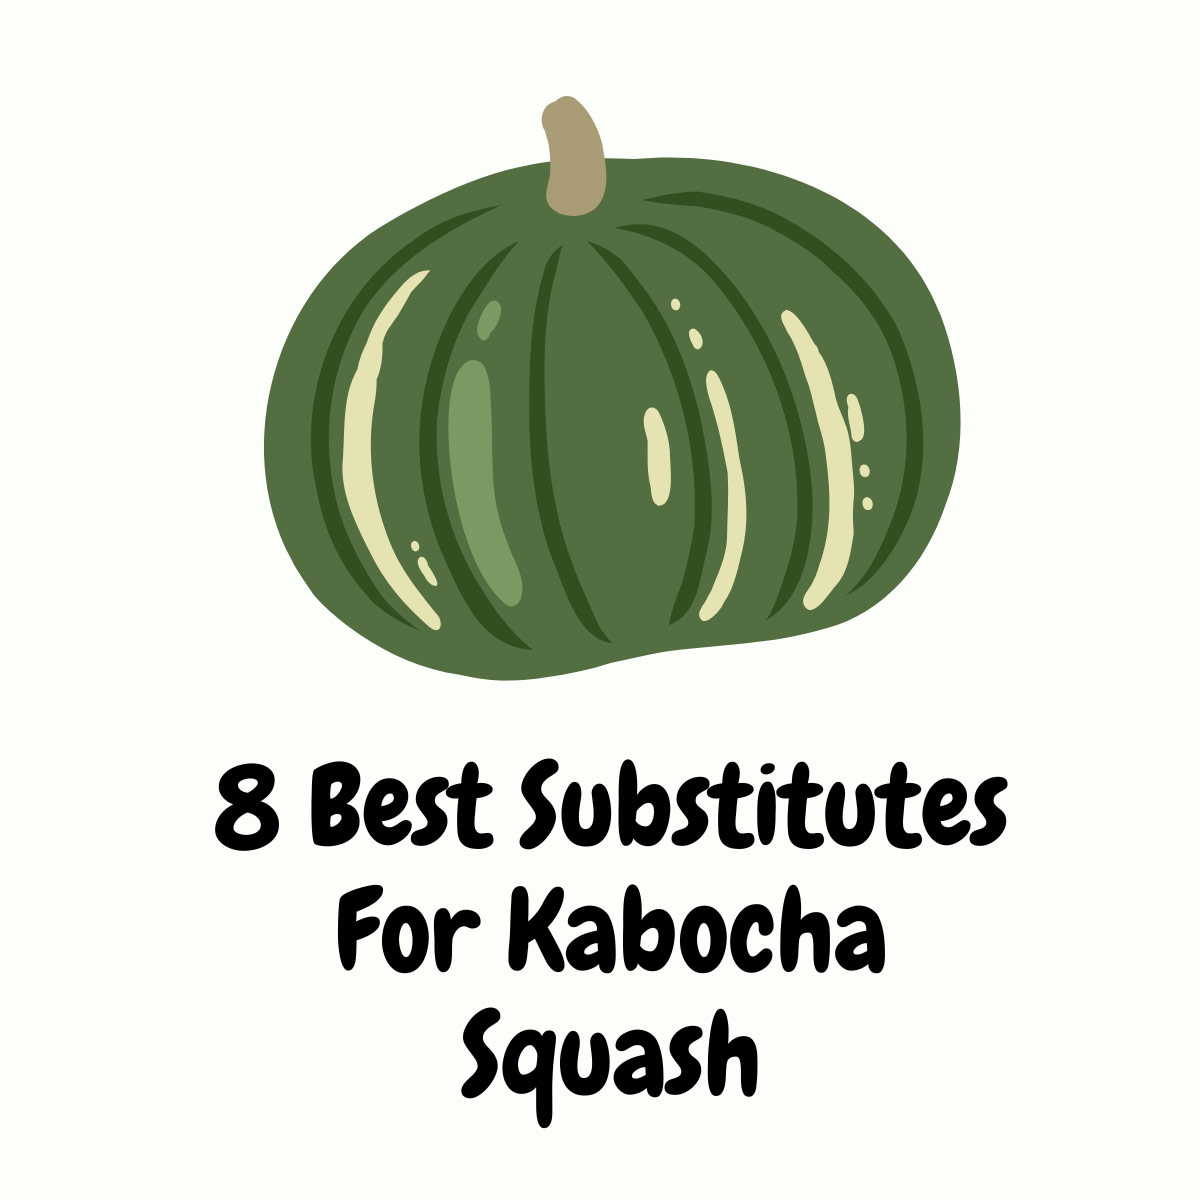 Substitutes For Kabocha Squash featured image | Girl Meets Food